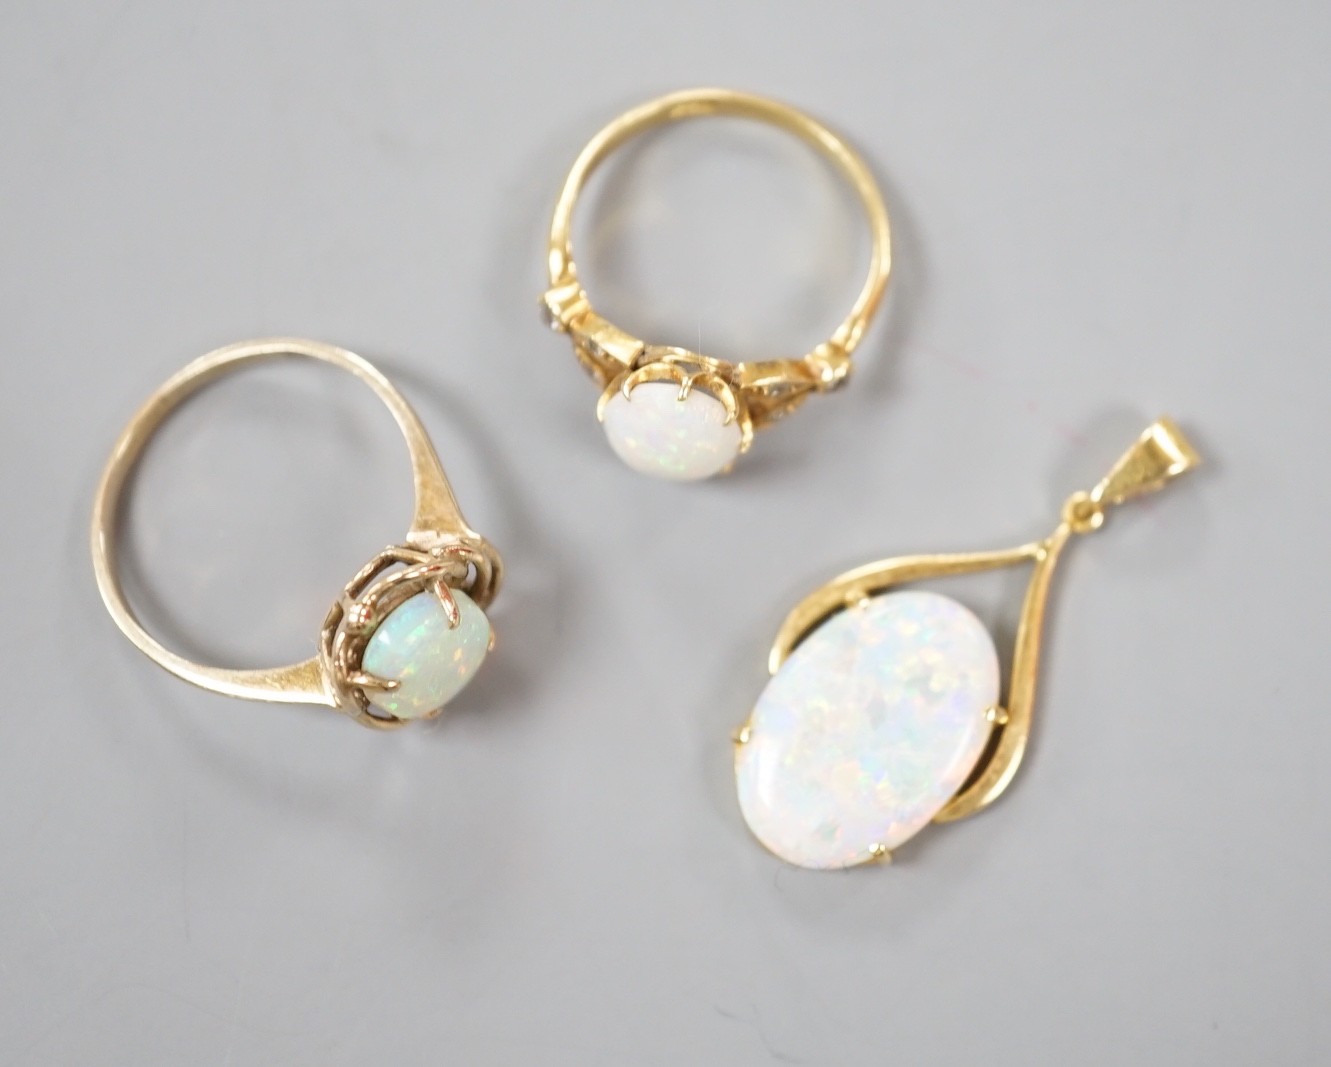 A 9k yellow metal and oval white opal set ring, size O, gross 2.1 grams, an 18ct yellow metal and oval white opal ring, with diamond chip set shoulders and a 70 and white opal set pendant, gross 5.2 grams.